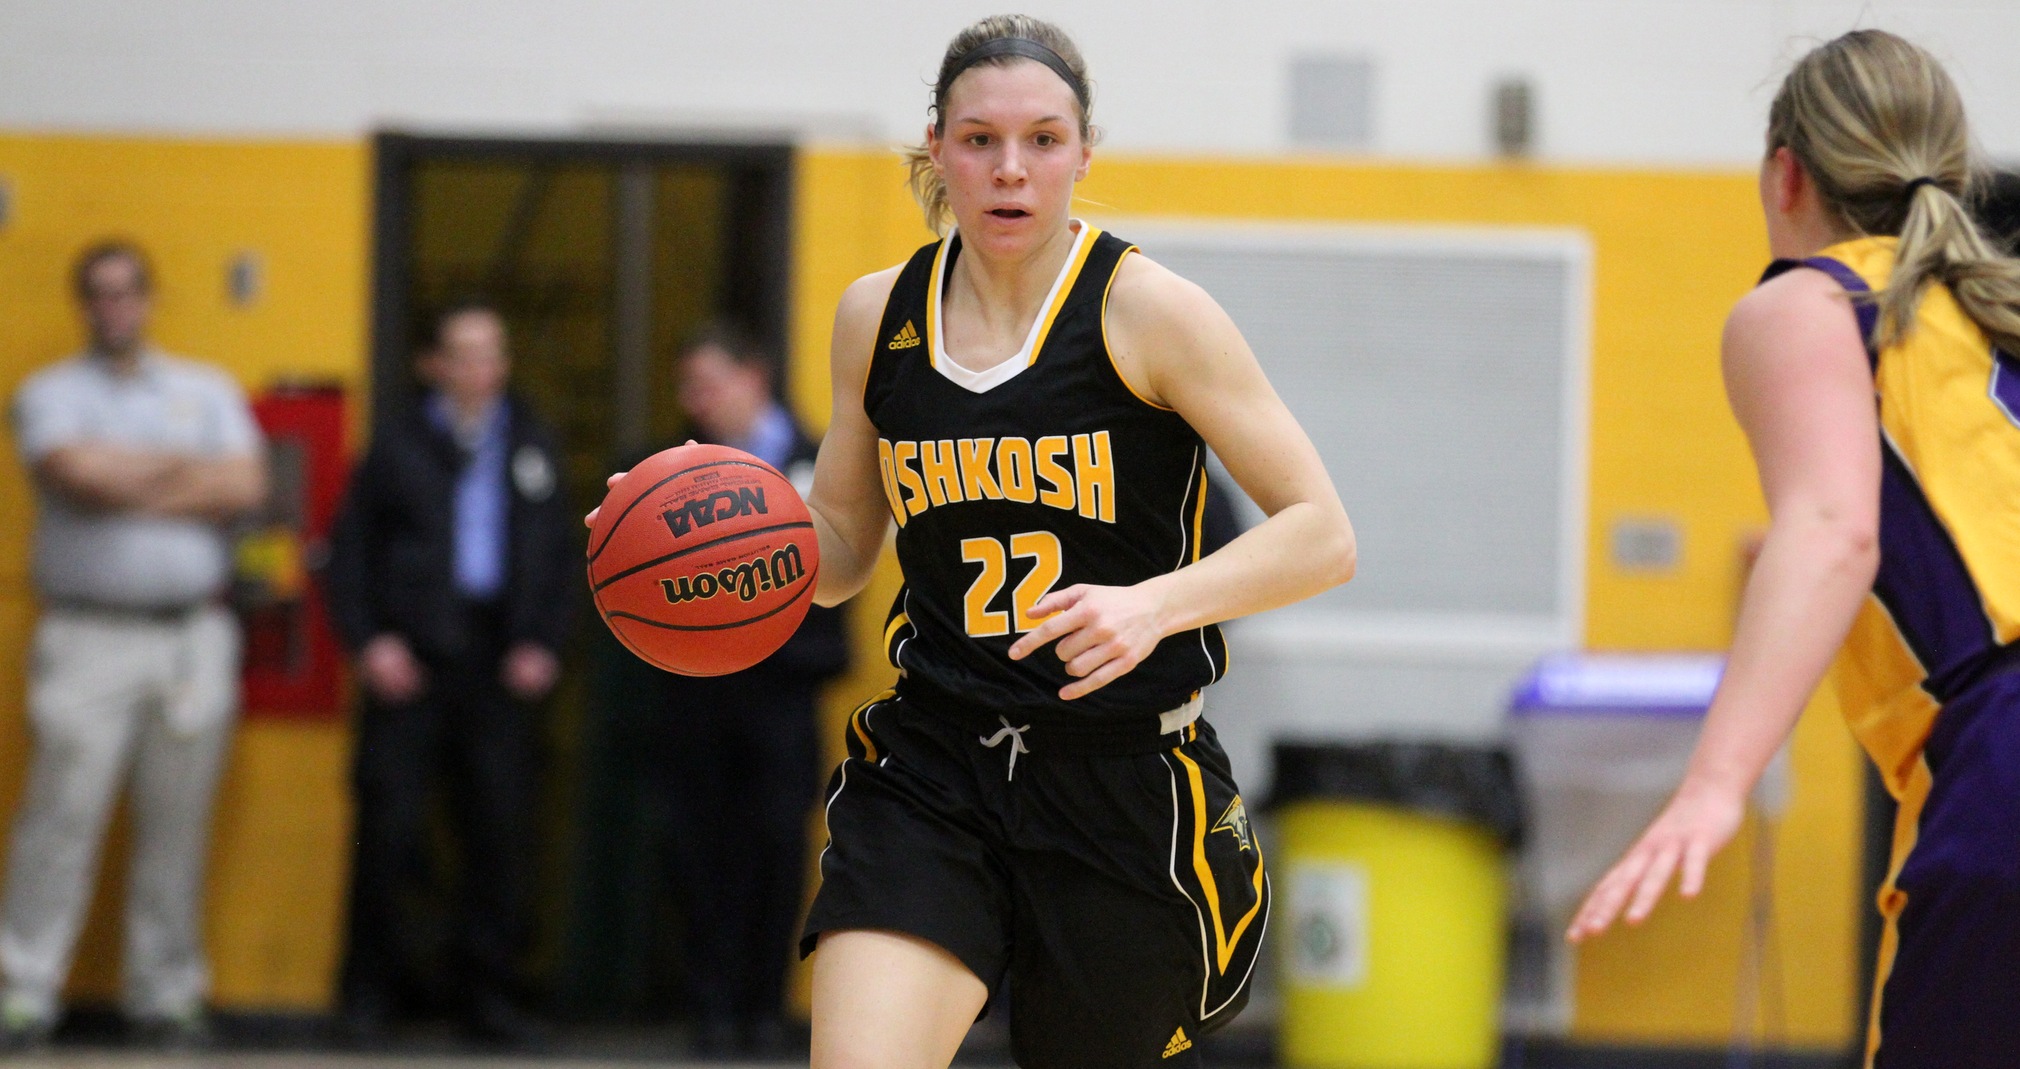 Melanie Schneider scored seven points and grabbed two rebounds against the Pointers.